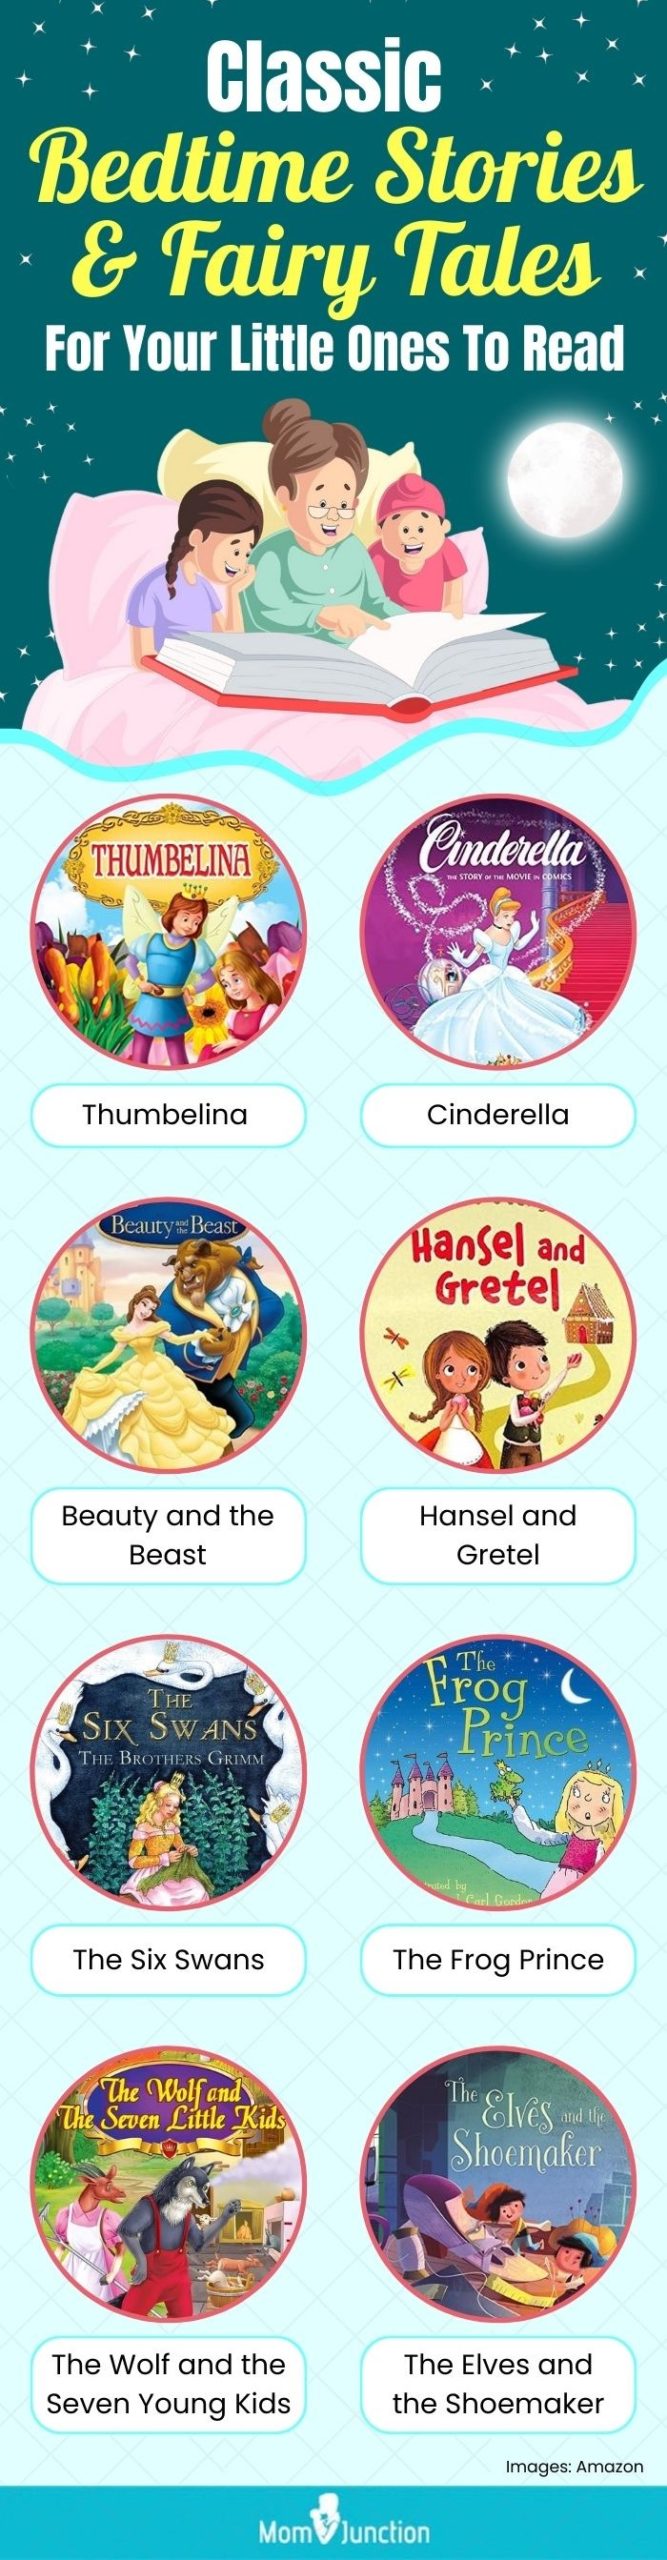 classic bedtime stories and fairy tales for your little ones to read (infographic)